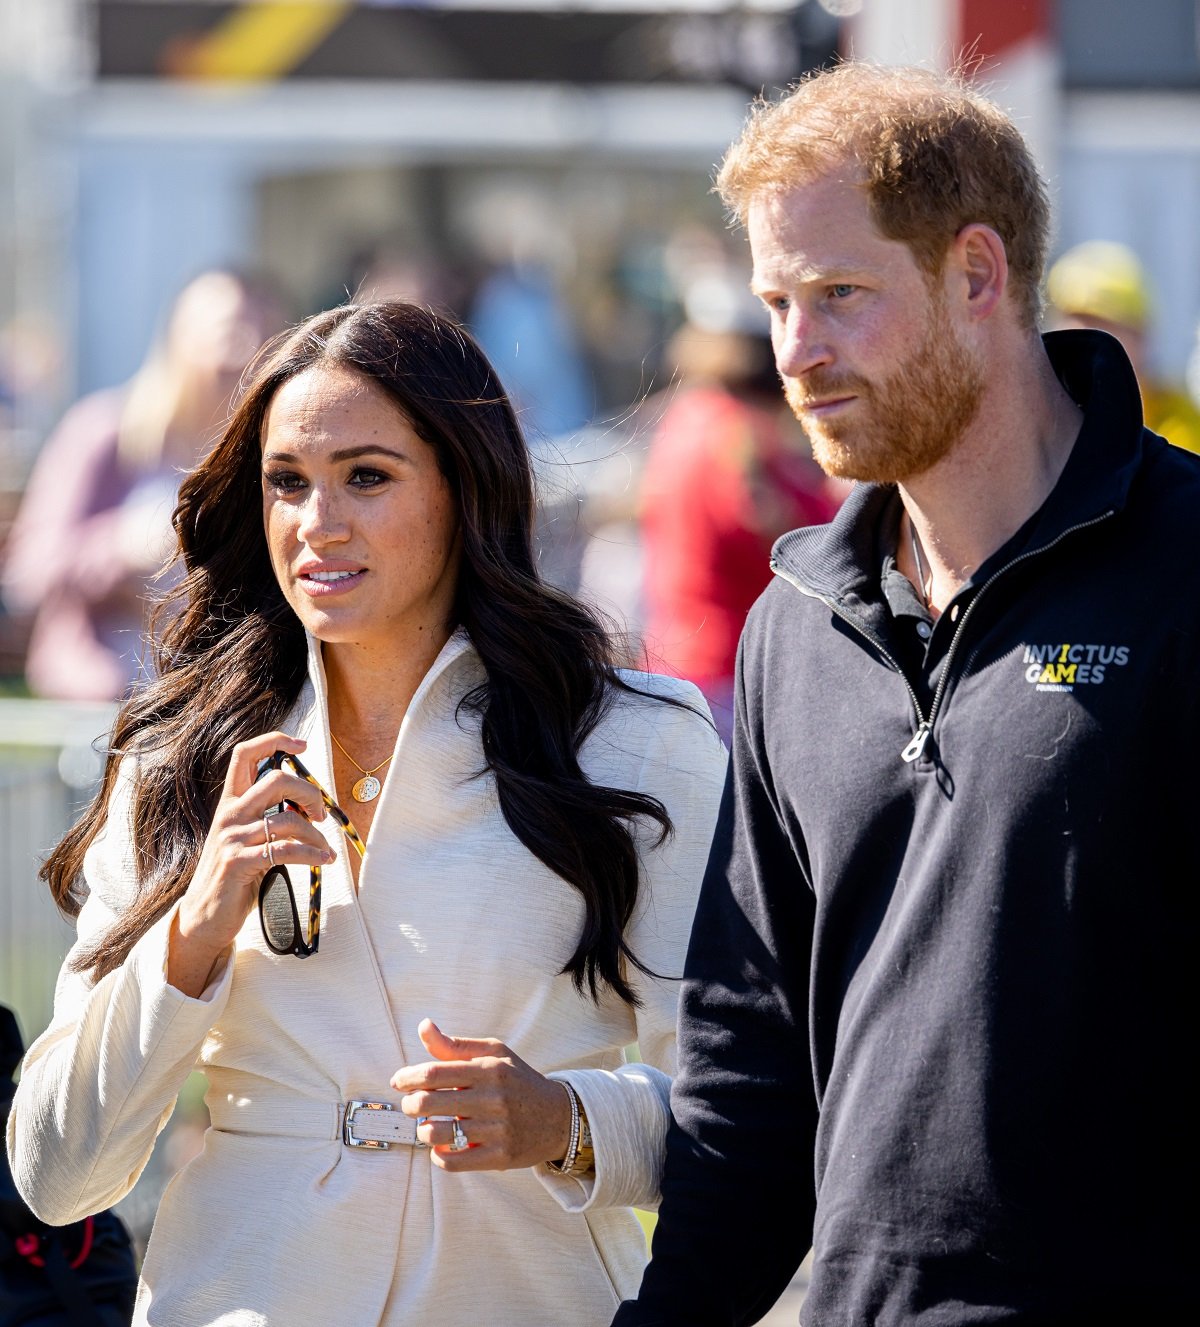 Meghan Markle and Prince Harry, who a royal expert believe have a money problem now, looking on at day two of the Invictus Games